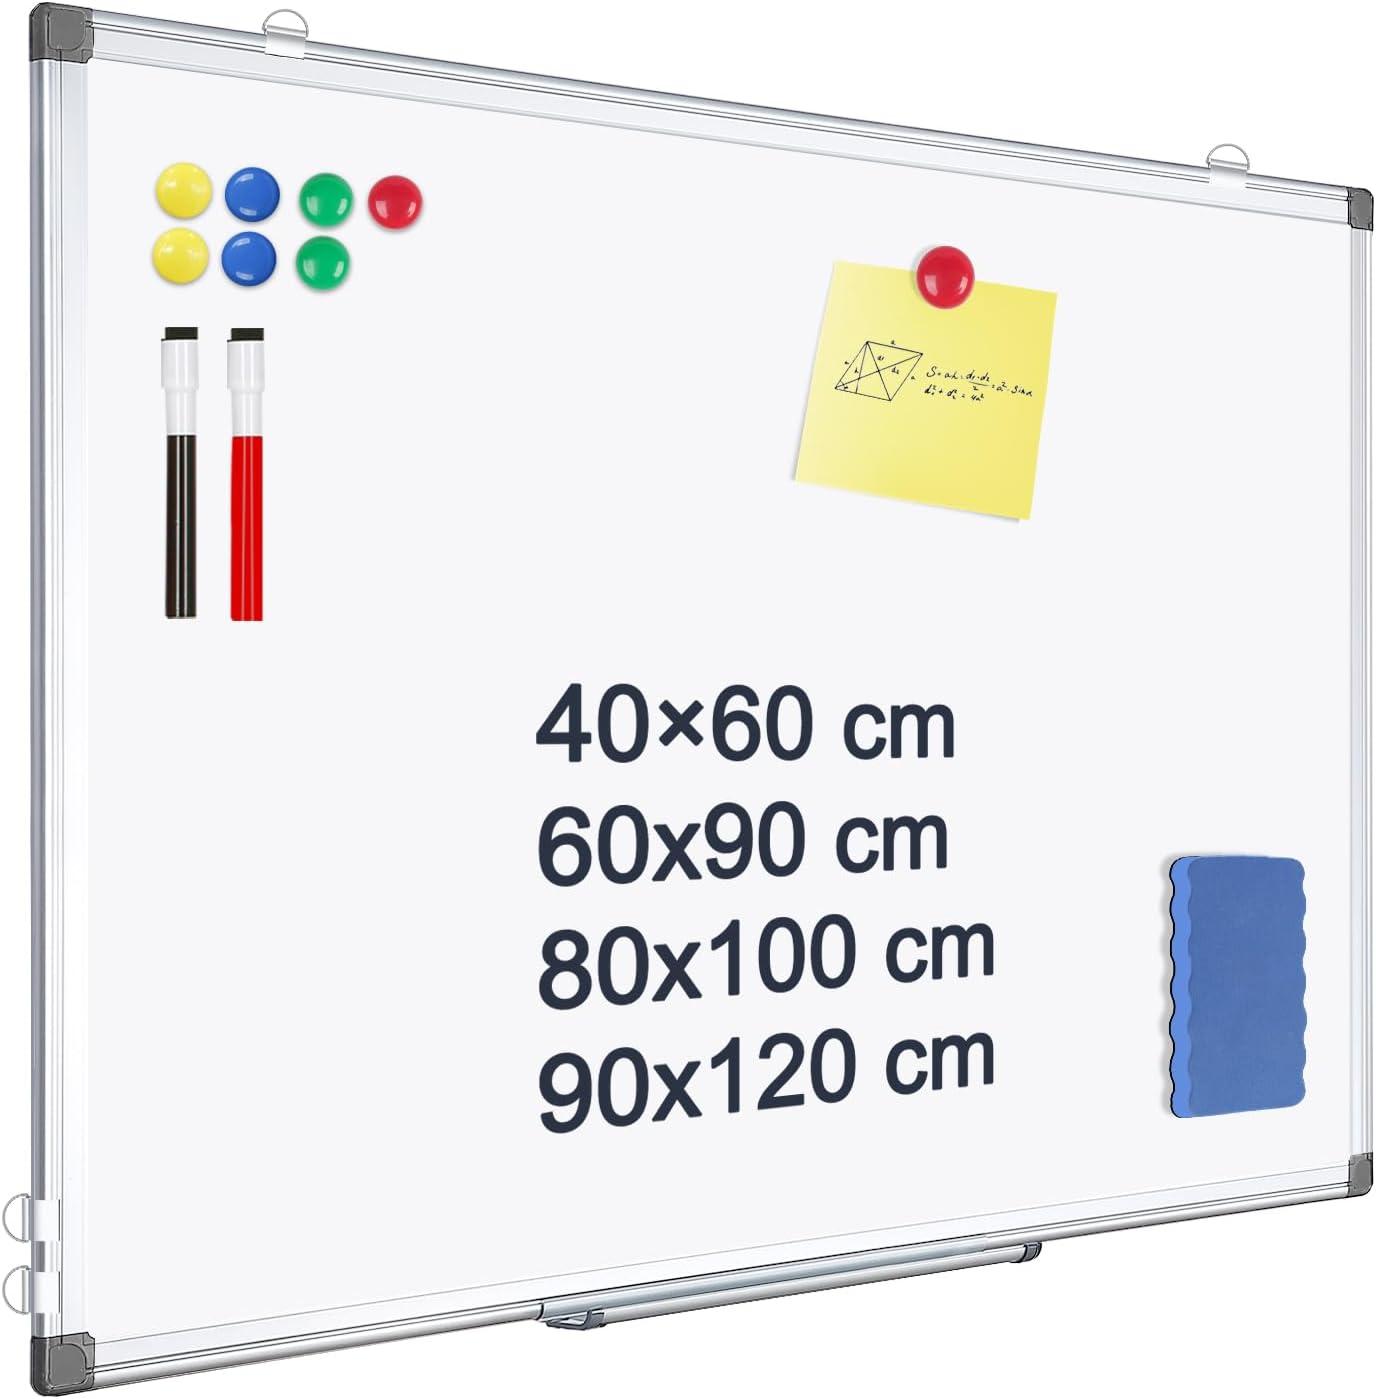 queenlink magnetic whiteboard kit 40 x 60 cm white board aluminum frame wall hanging mountable dry erase wipe